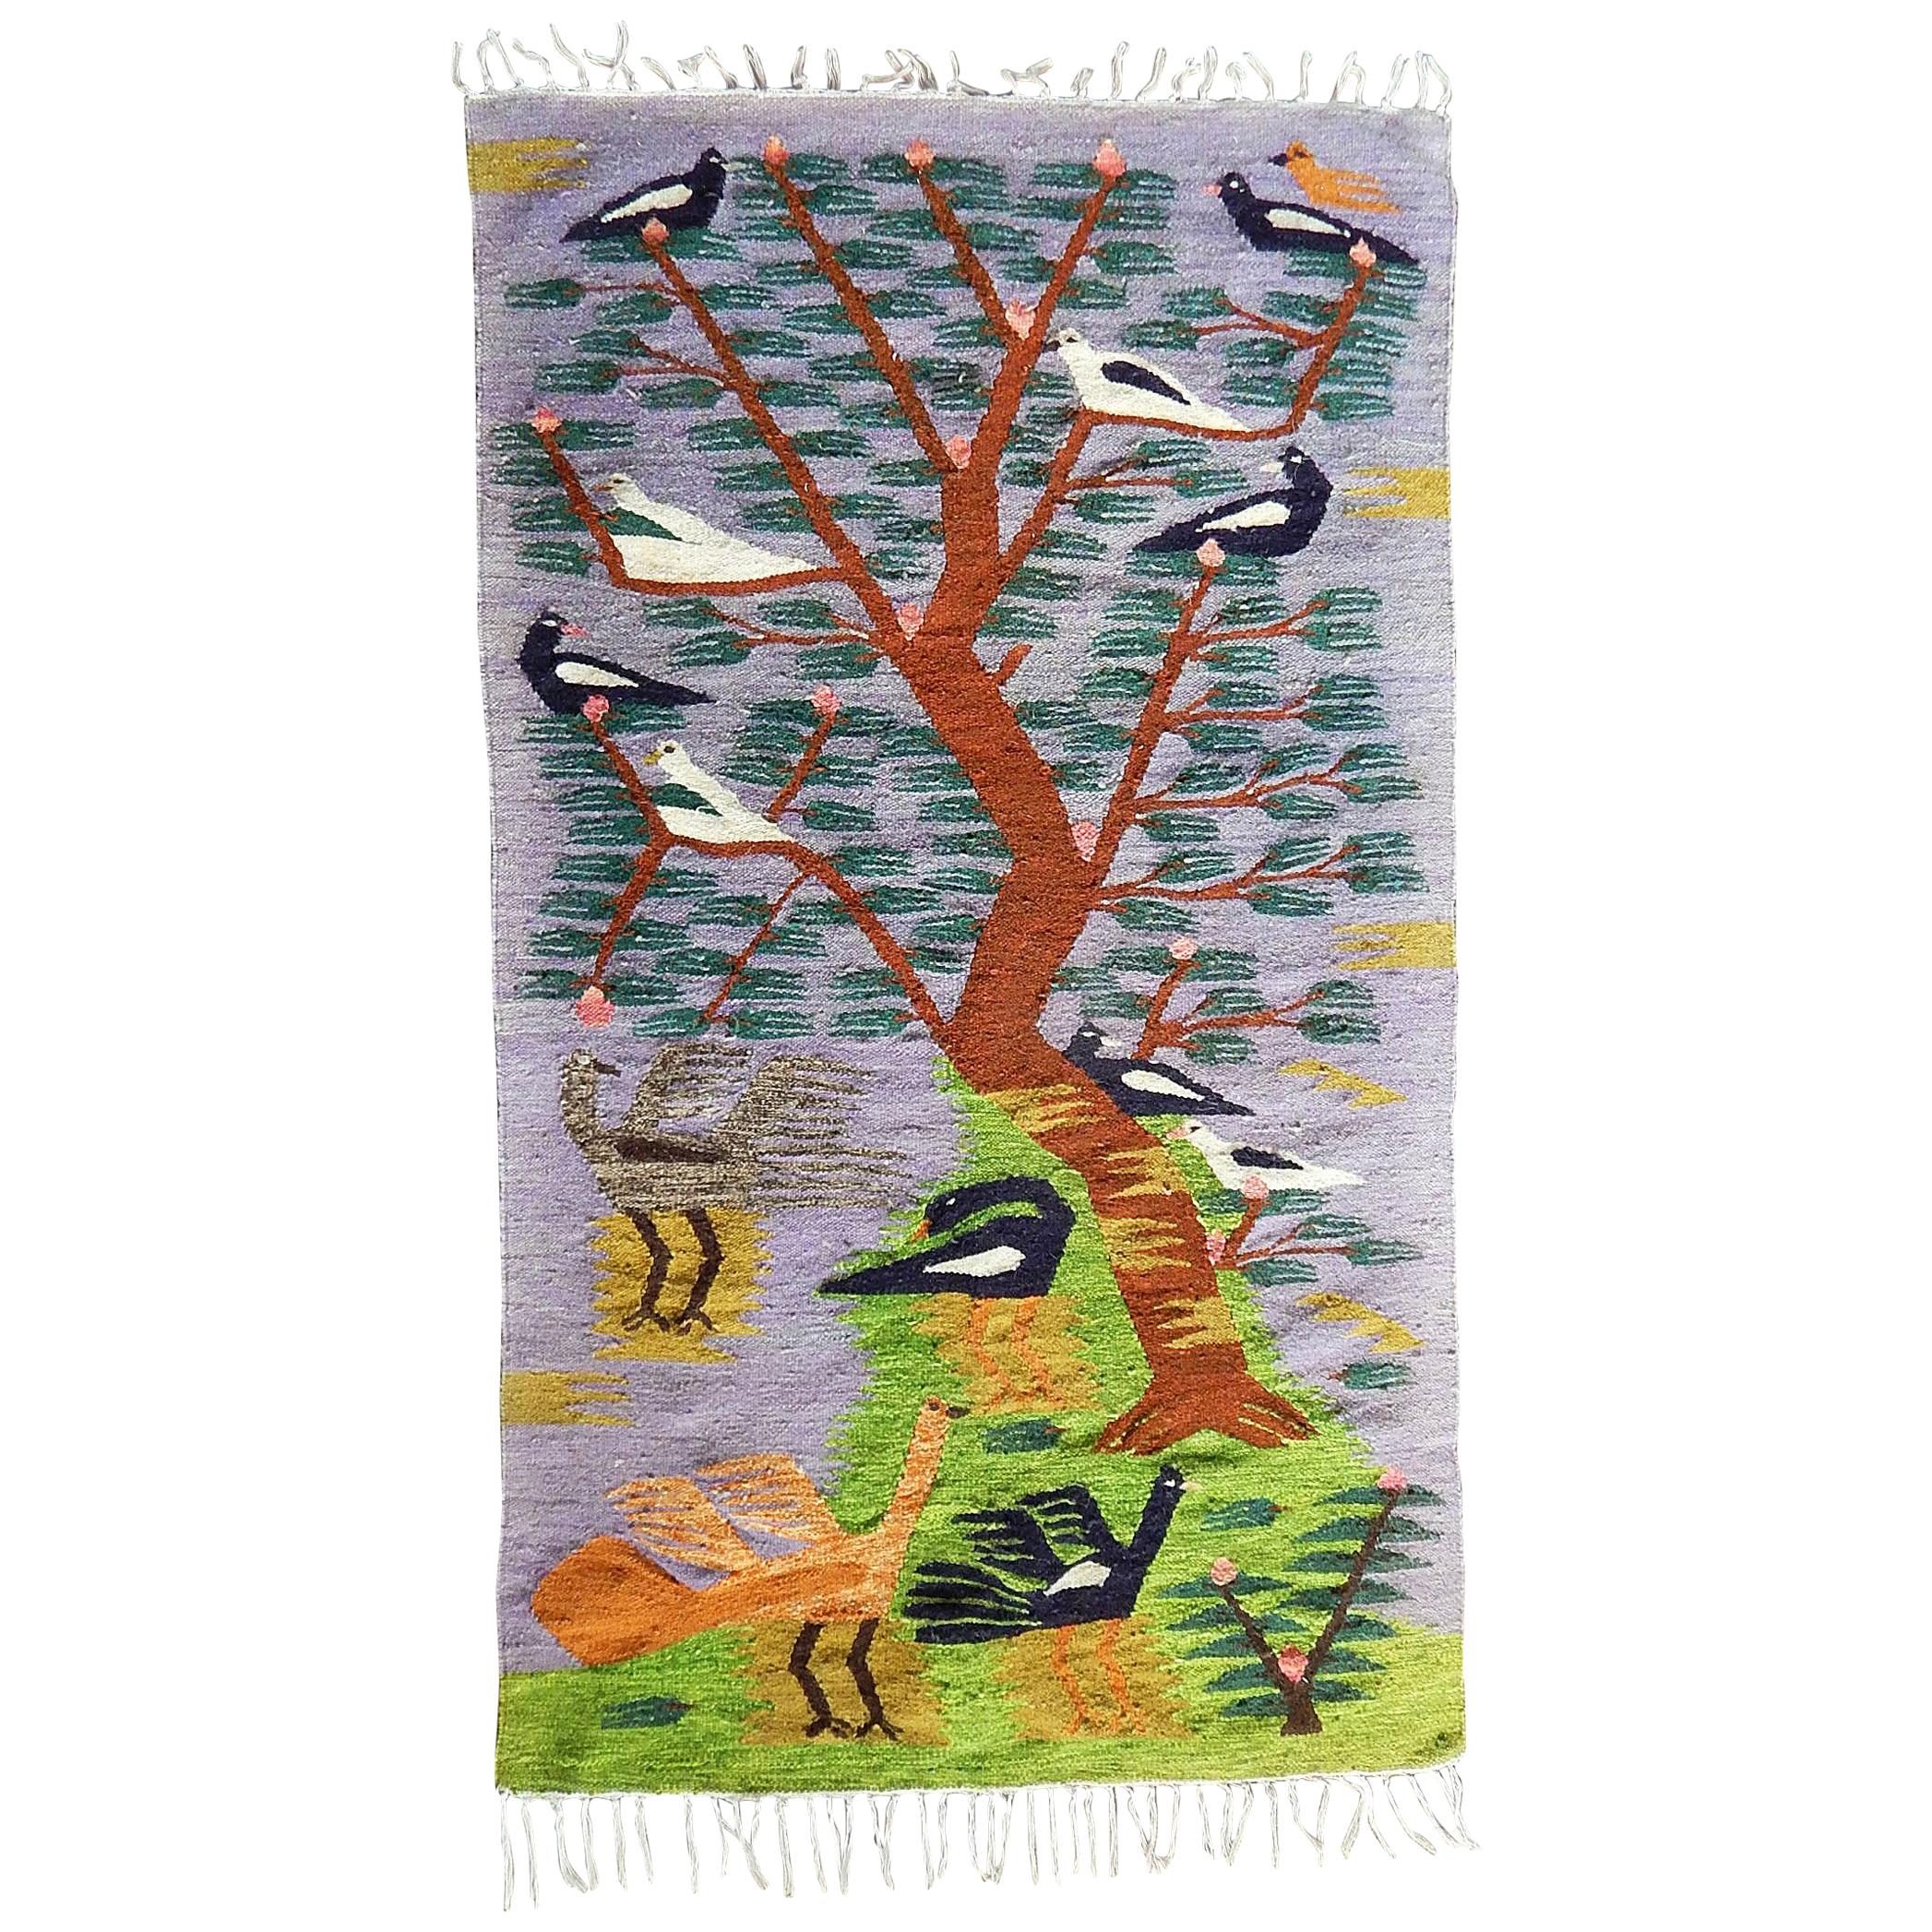 Egyptian "Tree of Life" Tapestry, Influenced by the Ramses Wissa Wassef Workshop